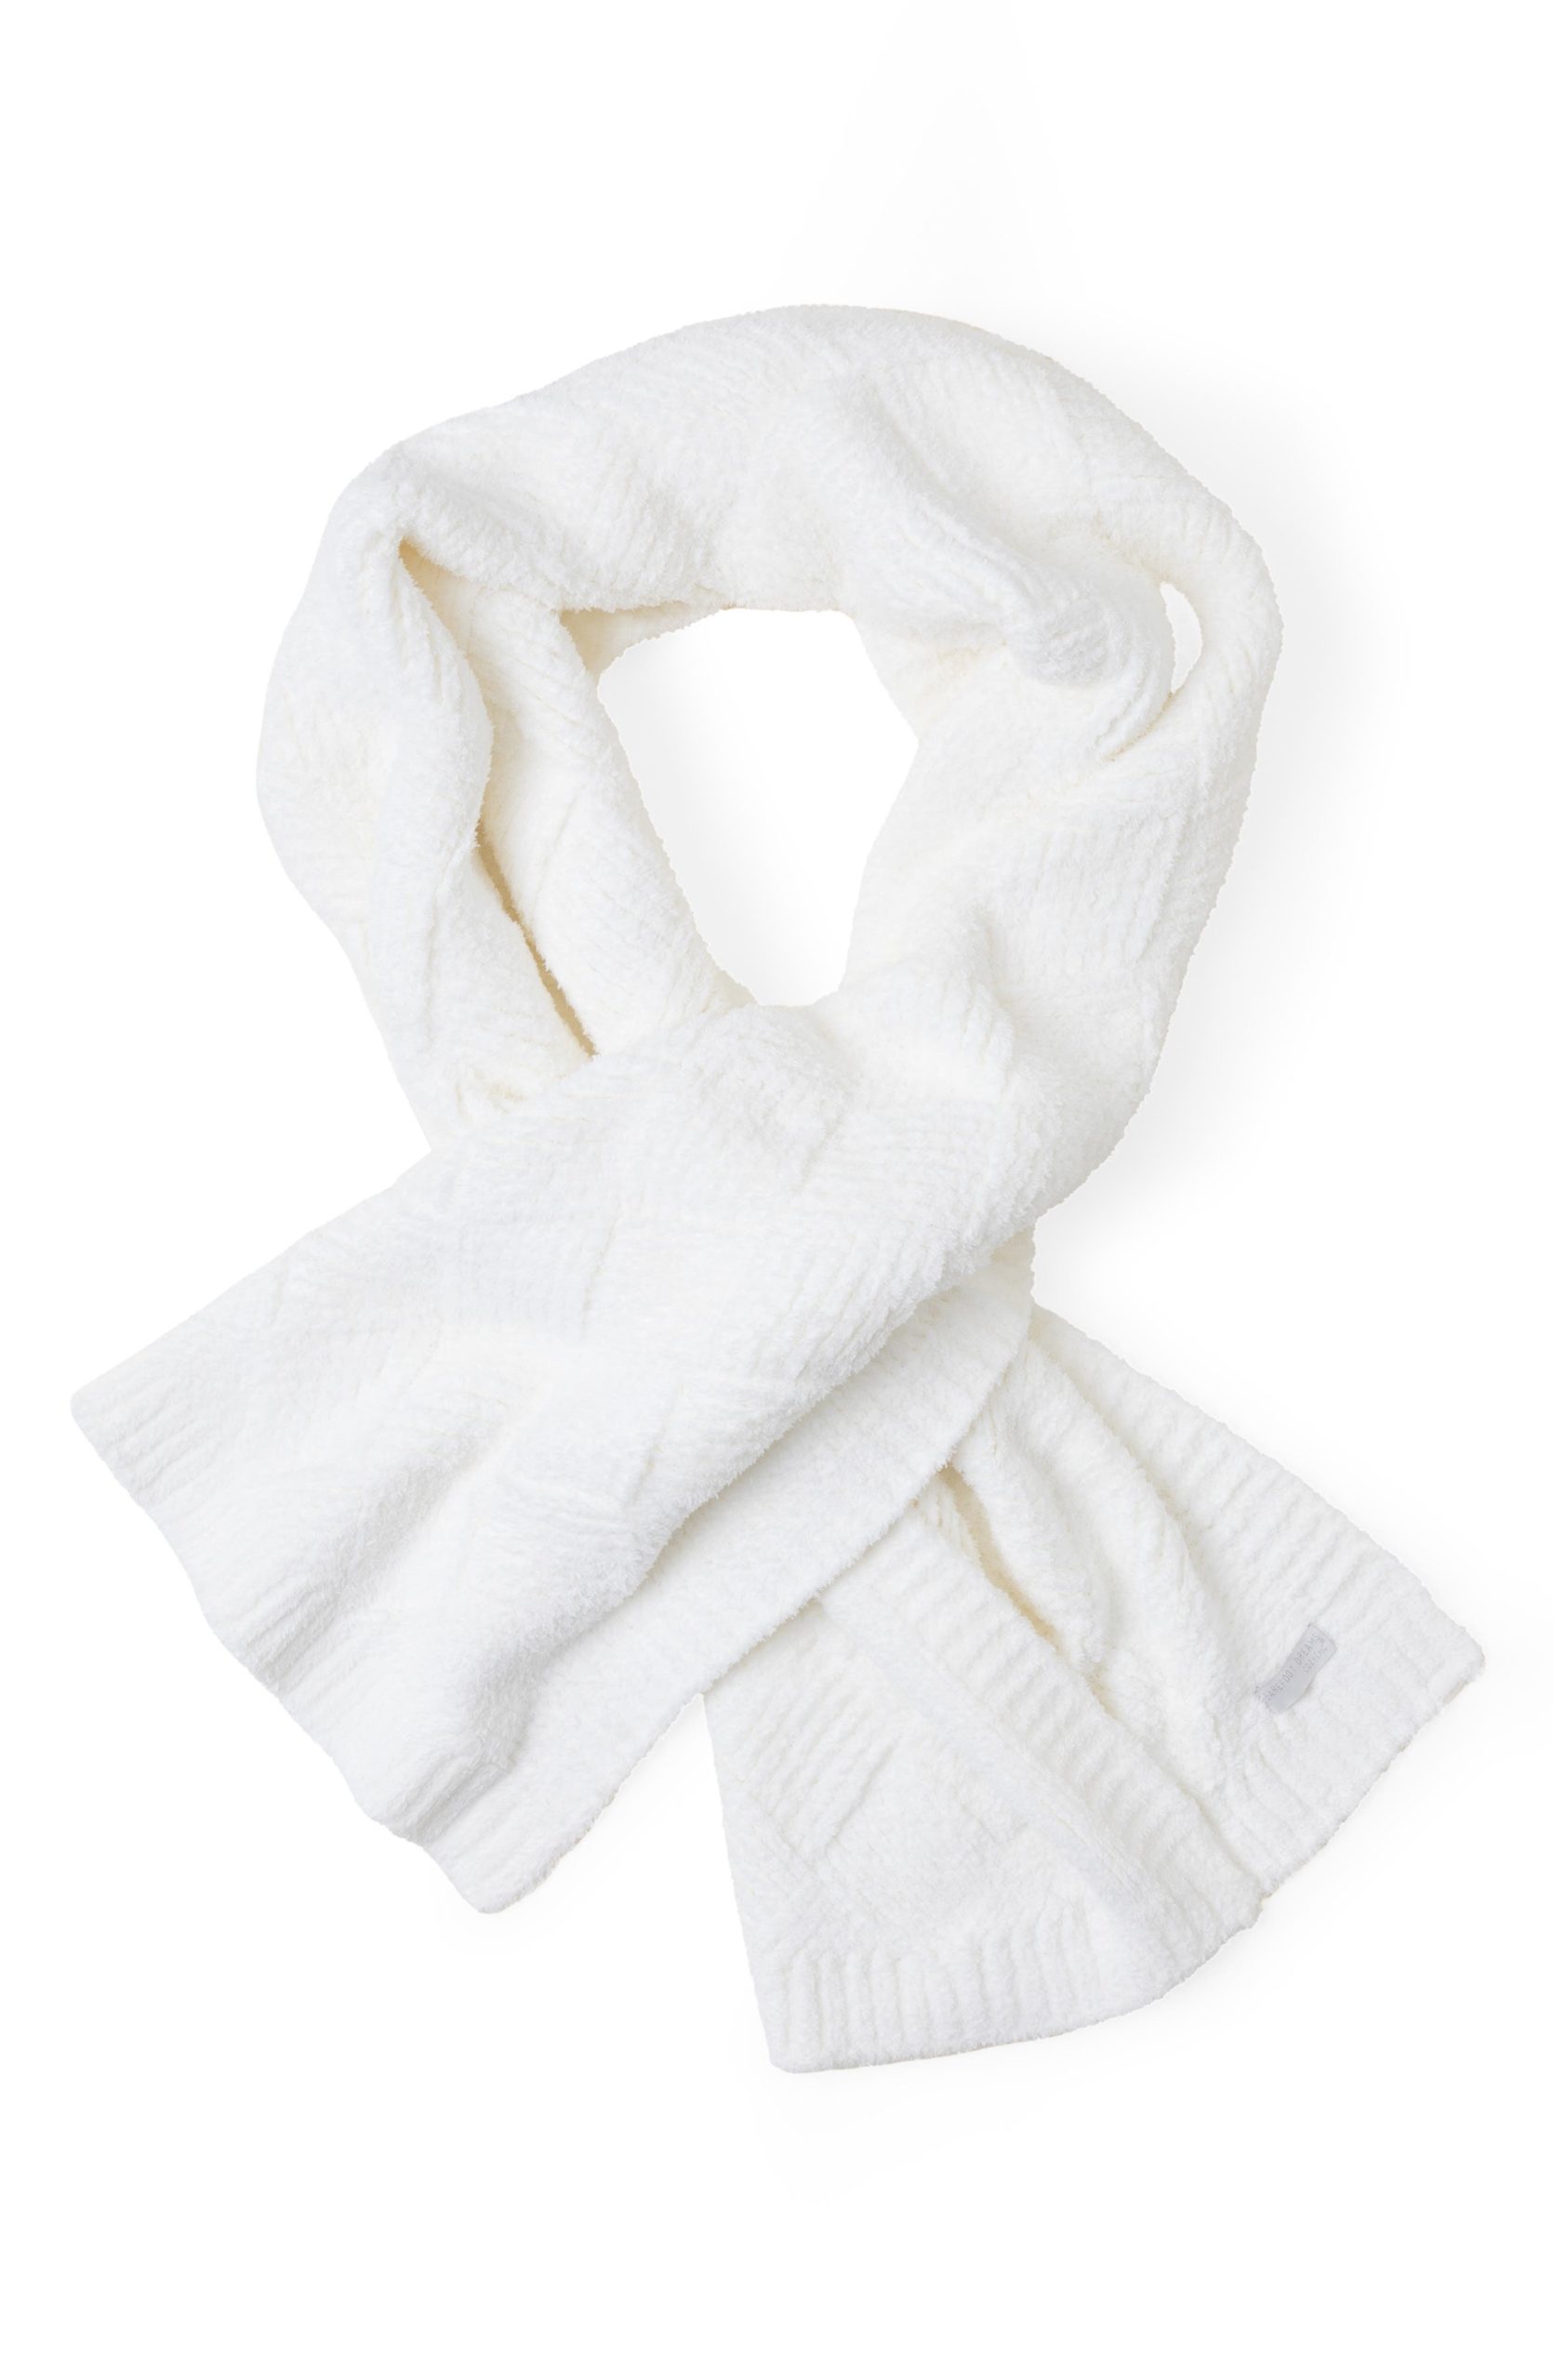 Barefoot dreams scarf: Wrap Yourself in Luxury插图4